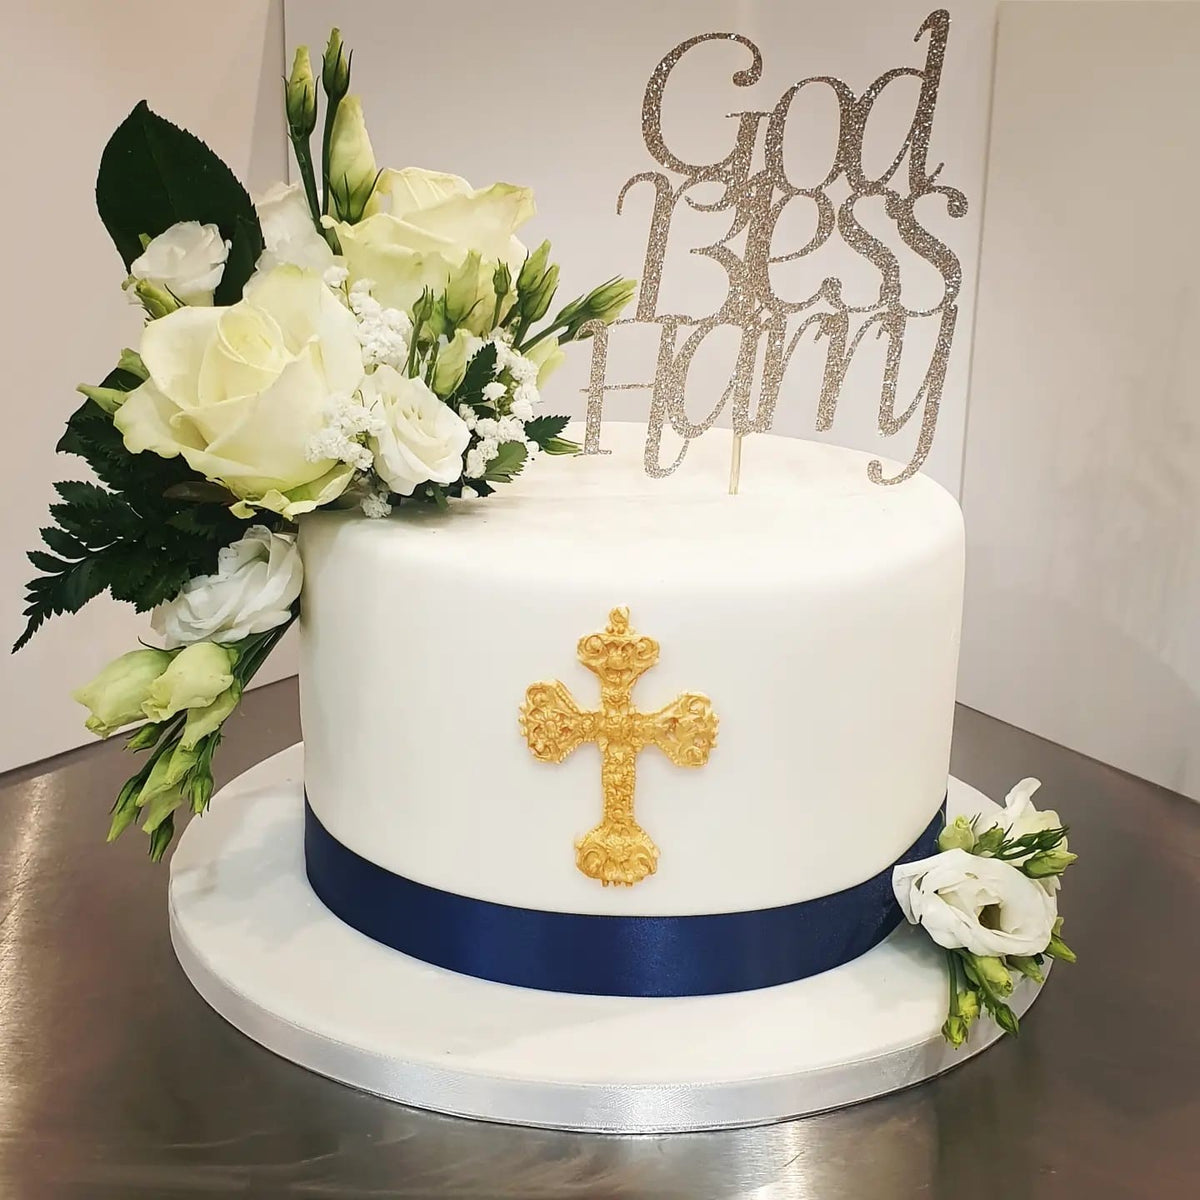 Specialty Communion And Baptism Cakes For Religious Occasions